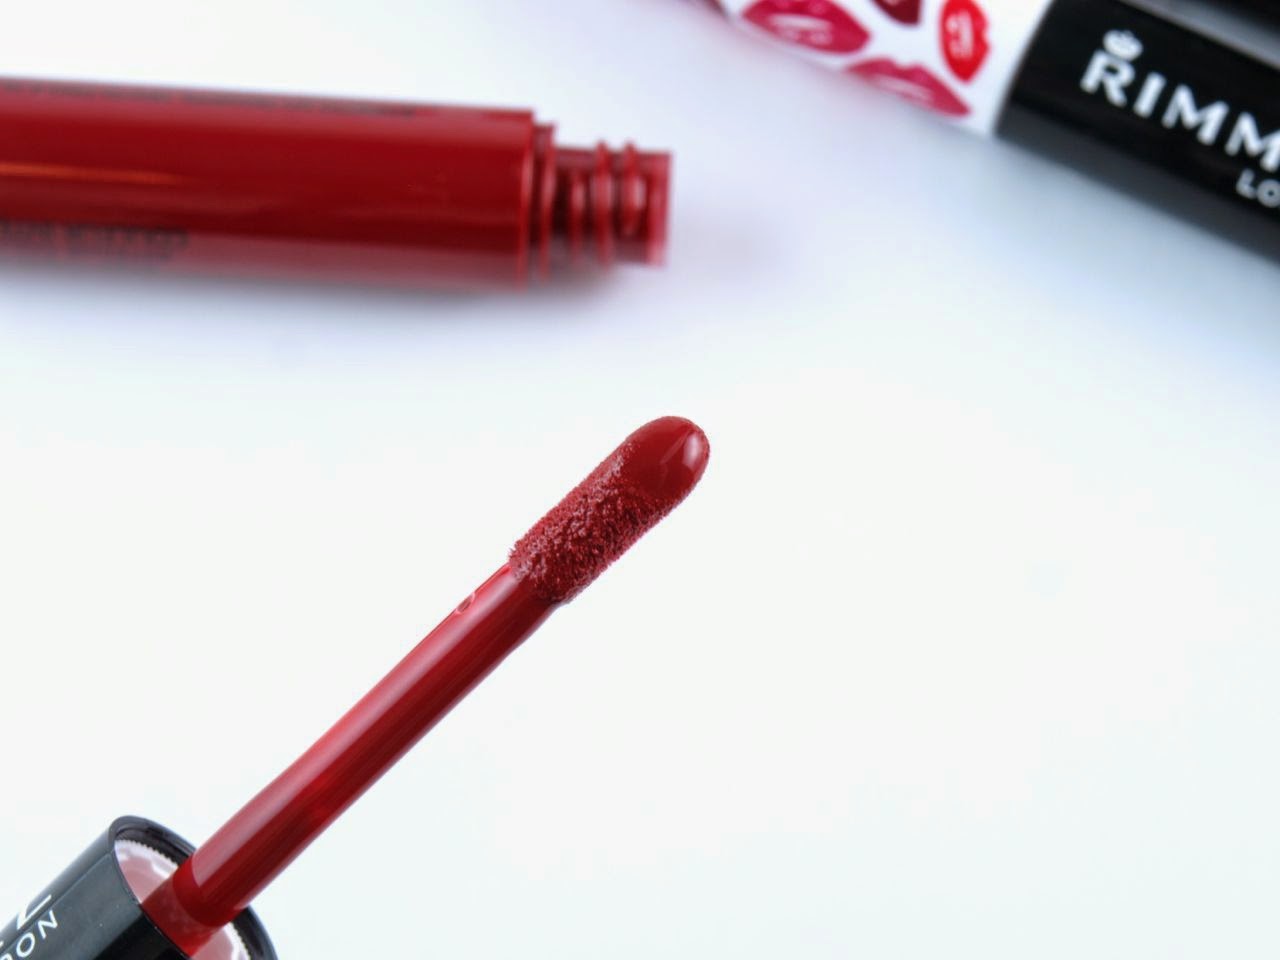 Rimmel Provocalips 16Hr Kiss Proof Lip Color: Review and Swatches